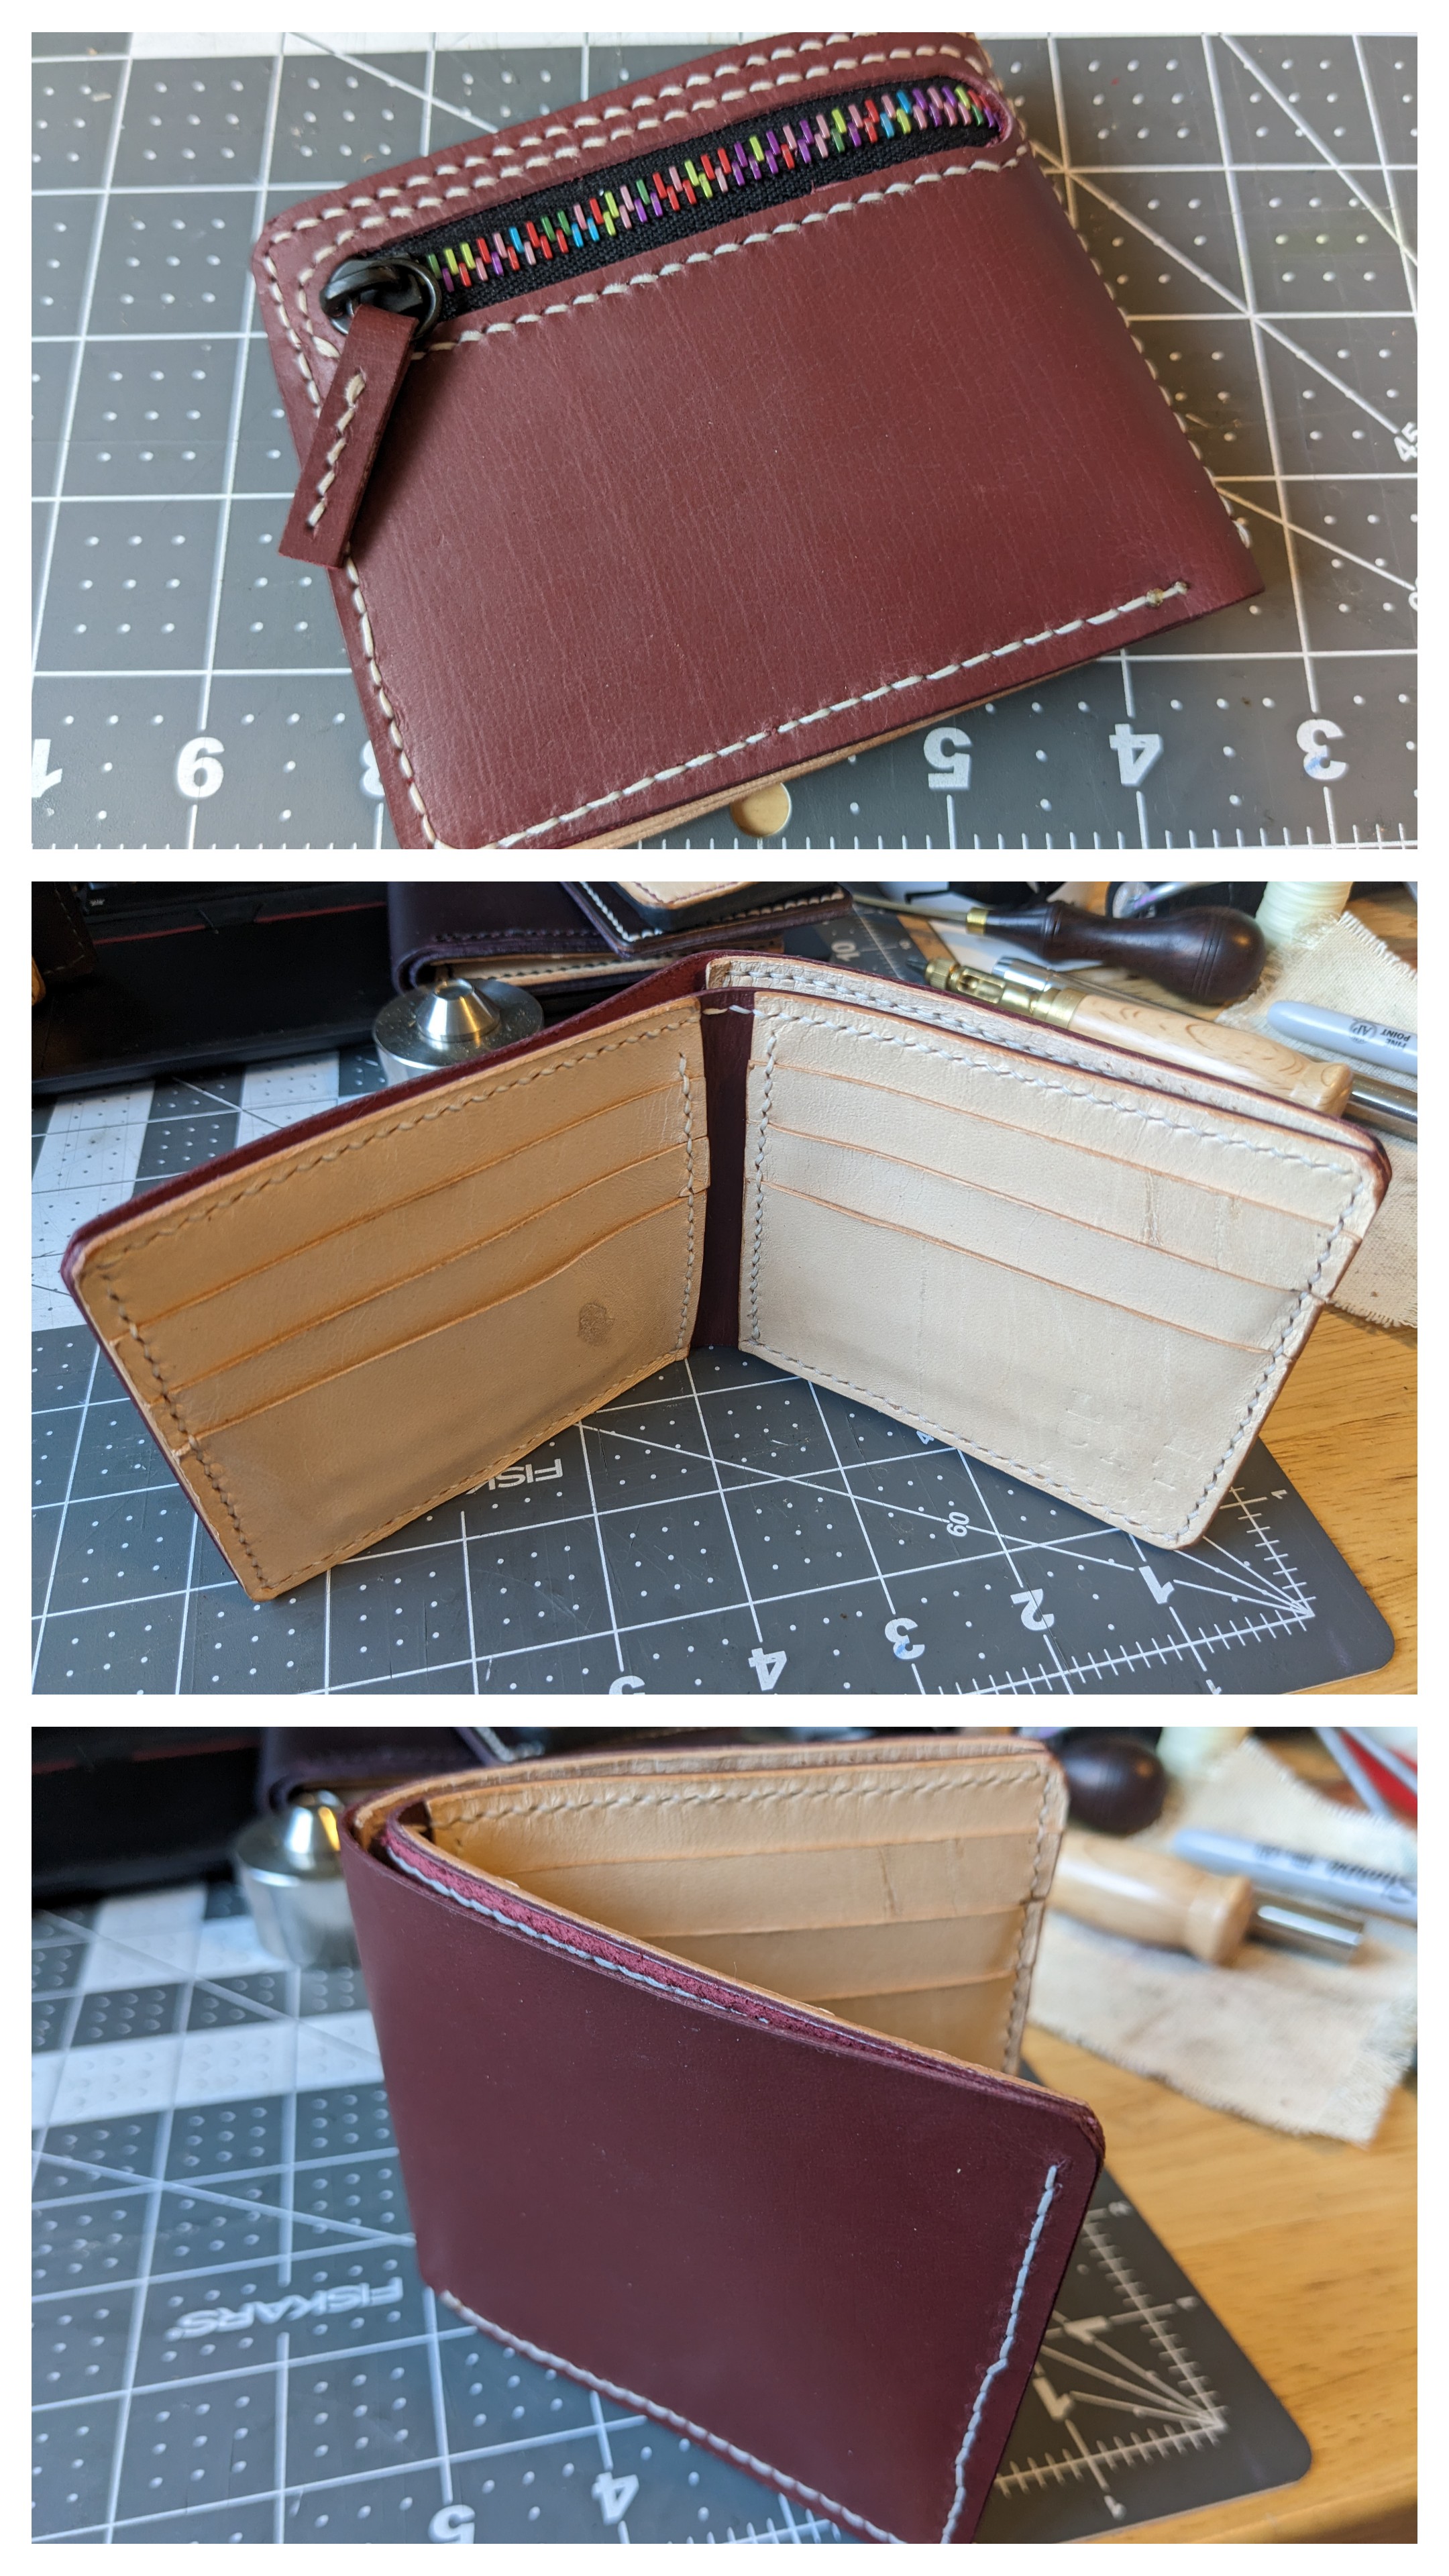 A collage showing a hand-stitched leather bifold with a zippered coin pocket on one exterior side.